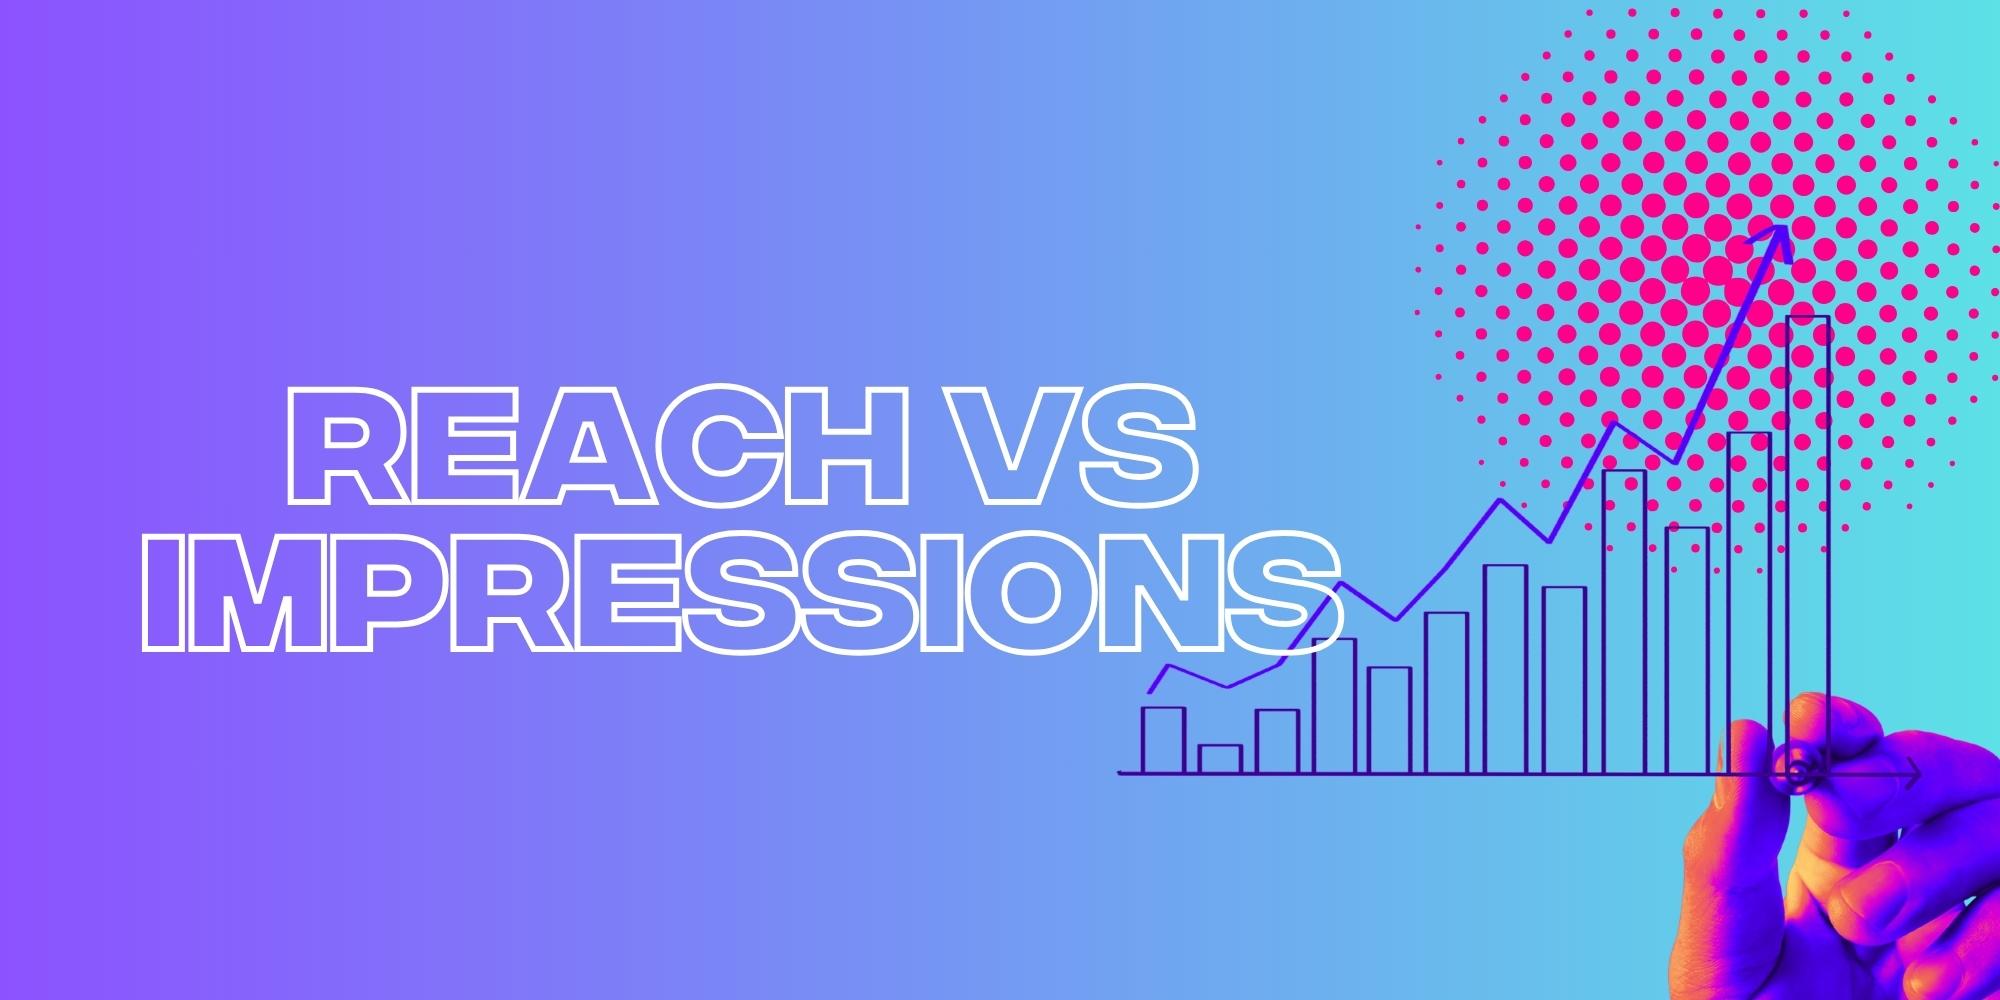 Reach Vs Impressions: Here’s What You Need To Know